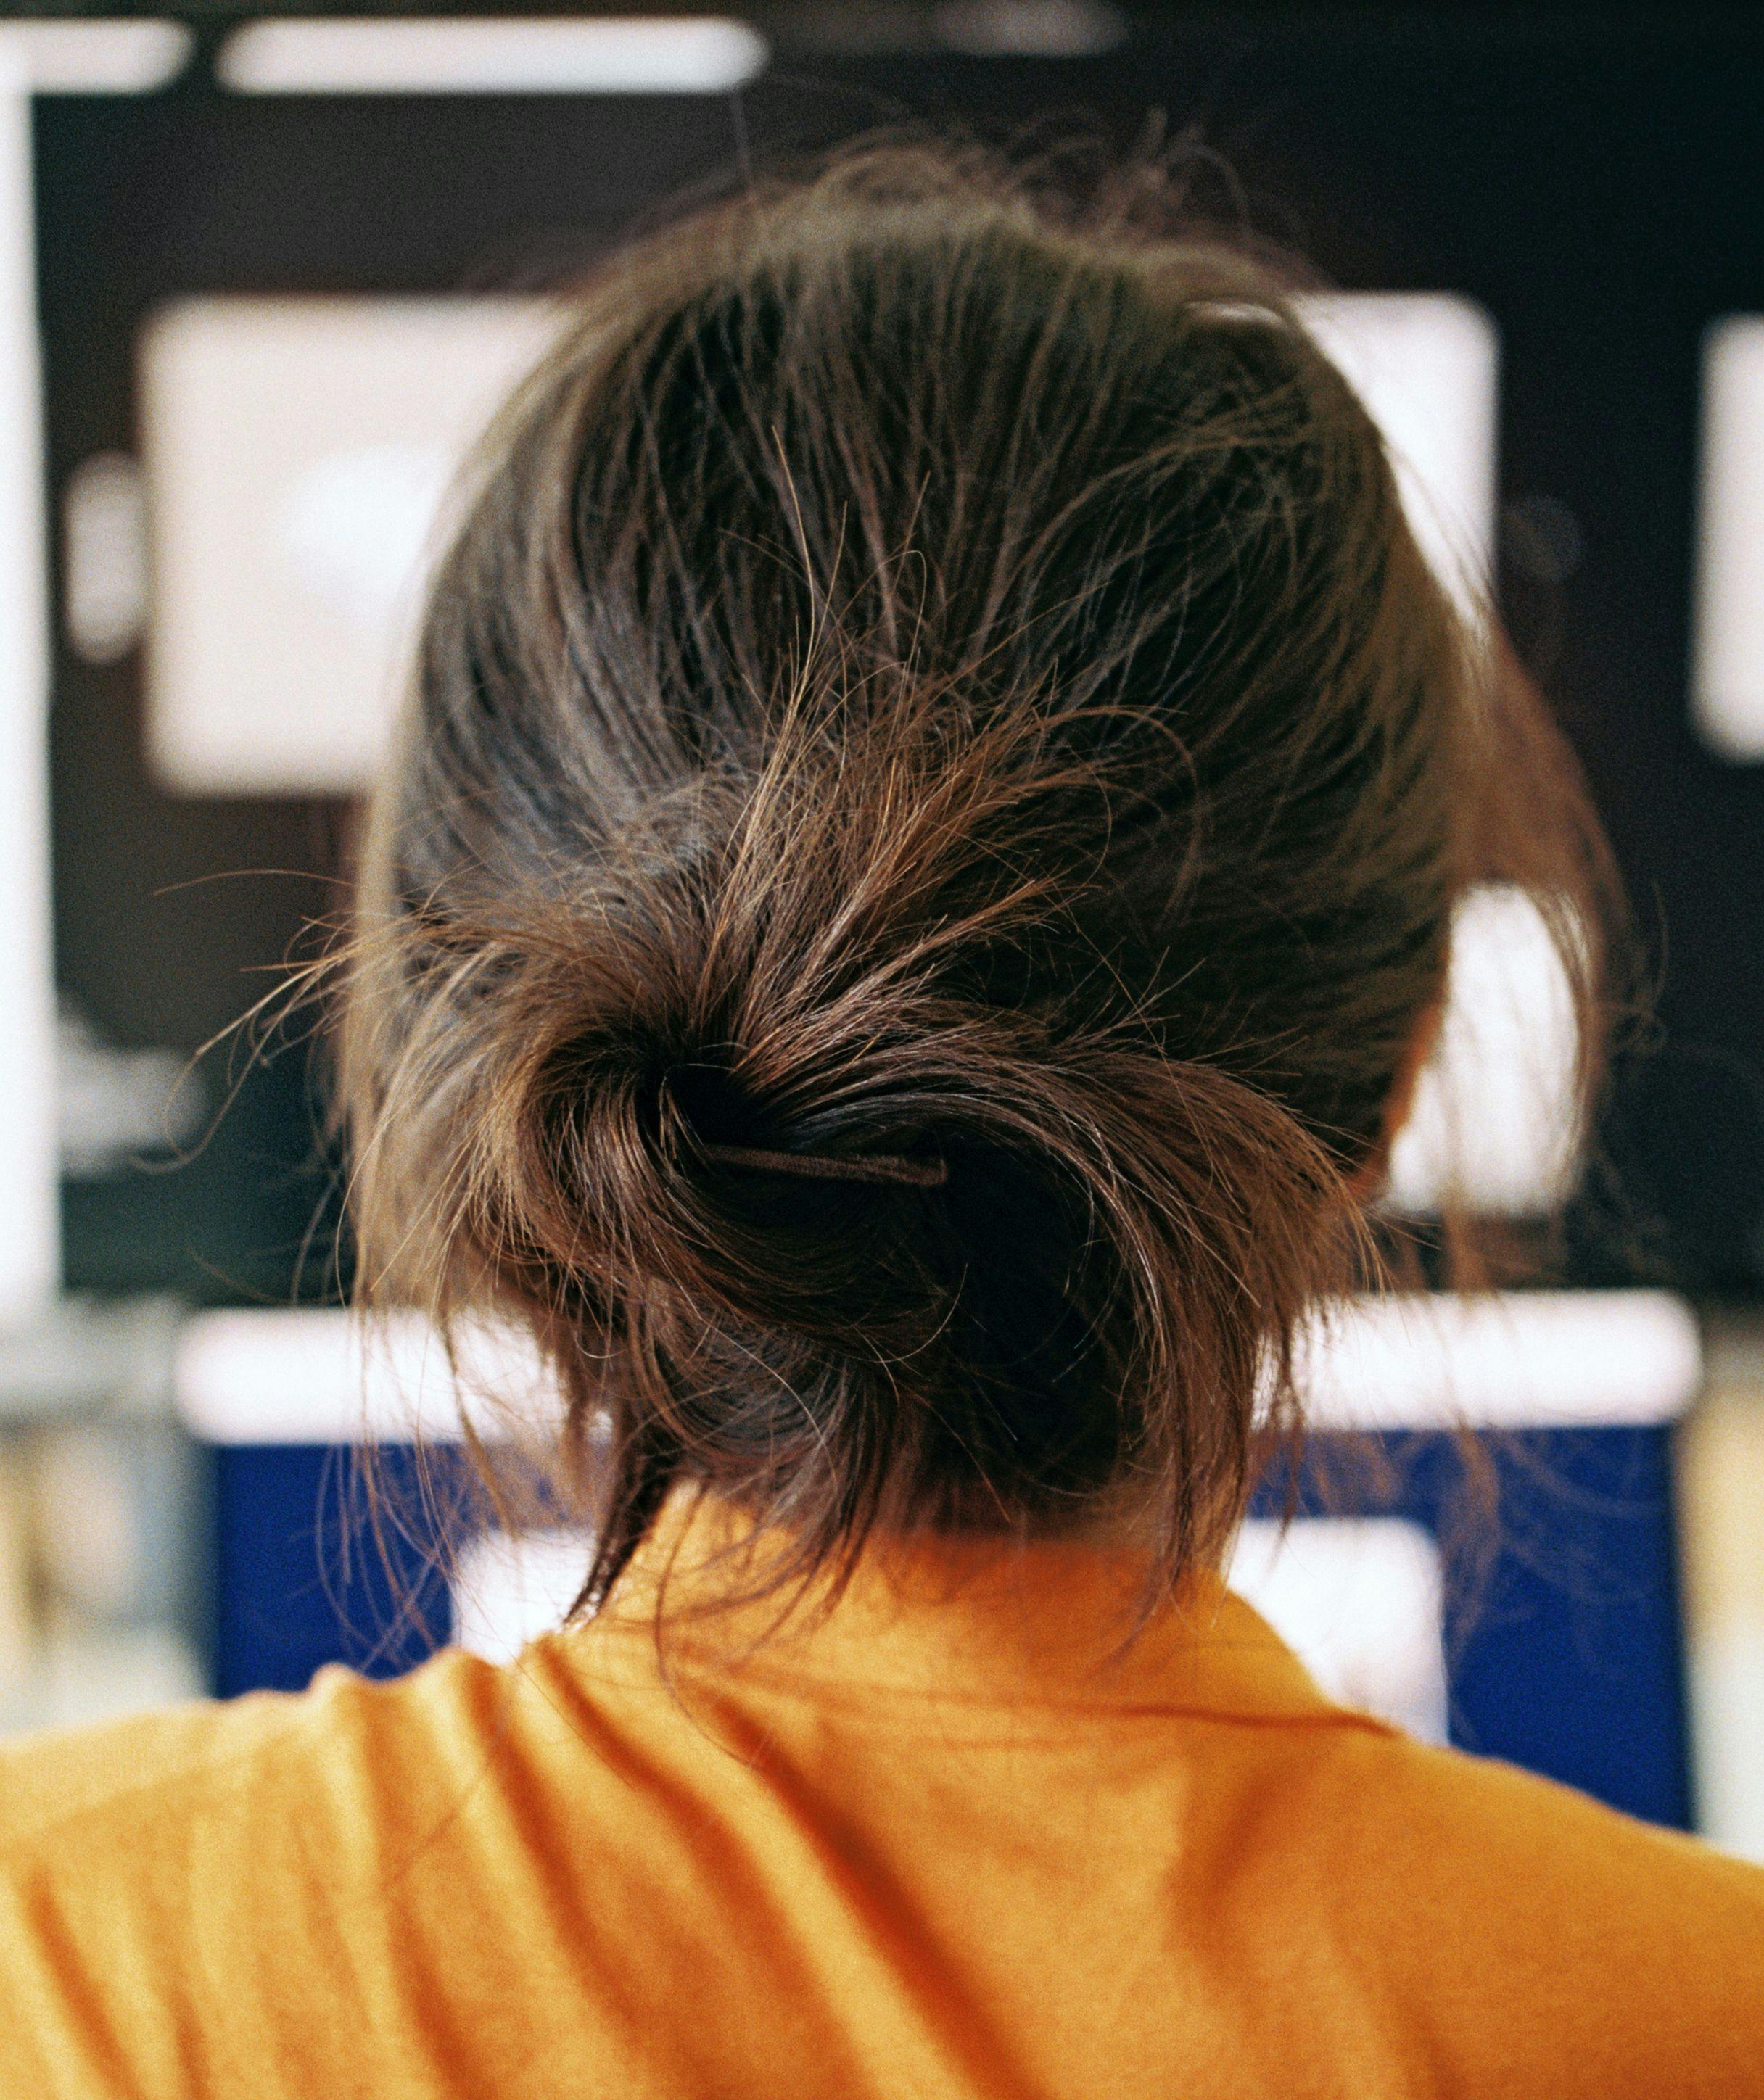 A close-up of a woman's hair seen from behind